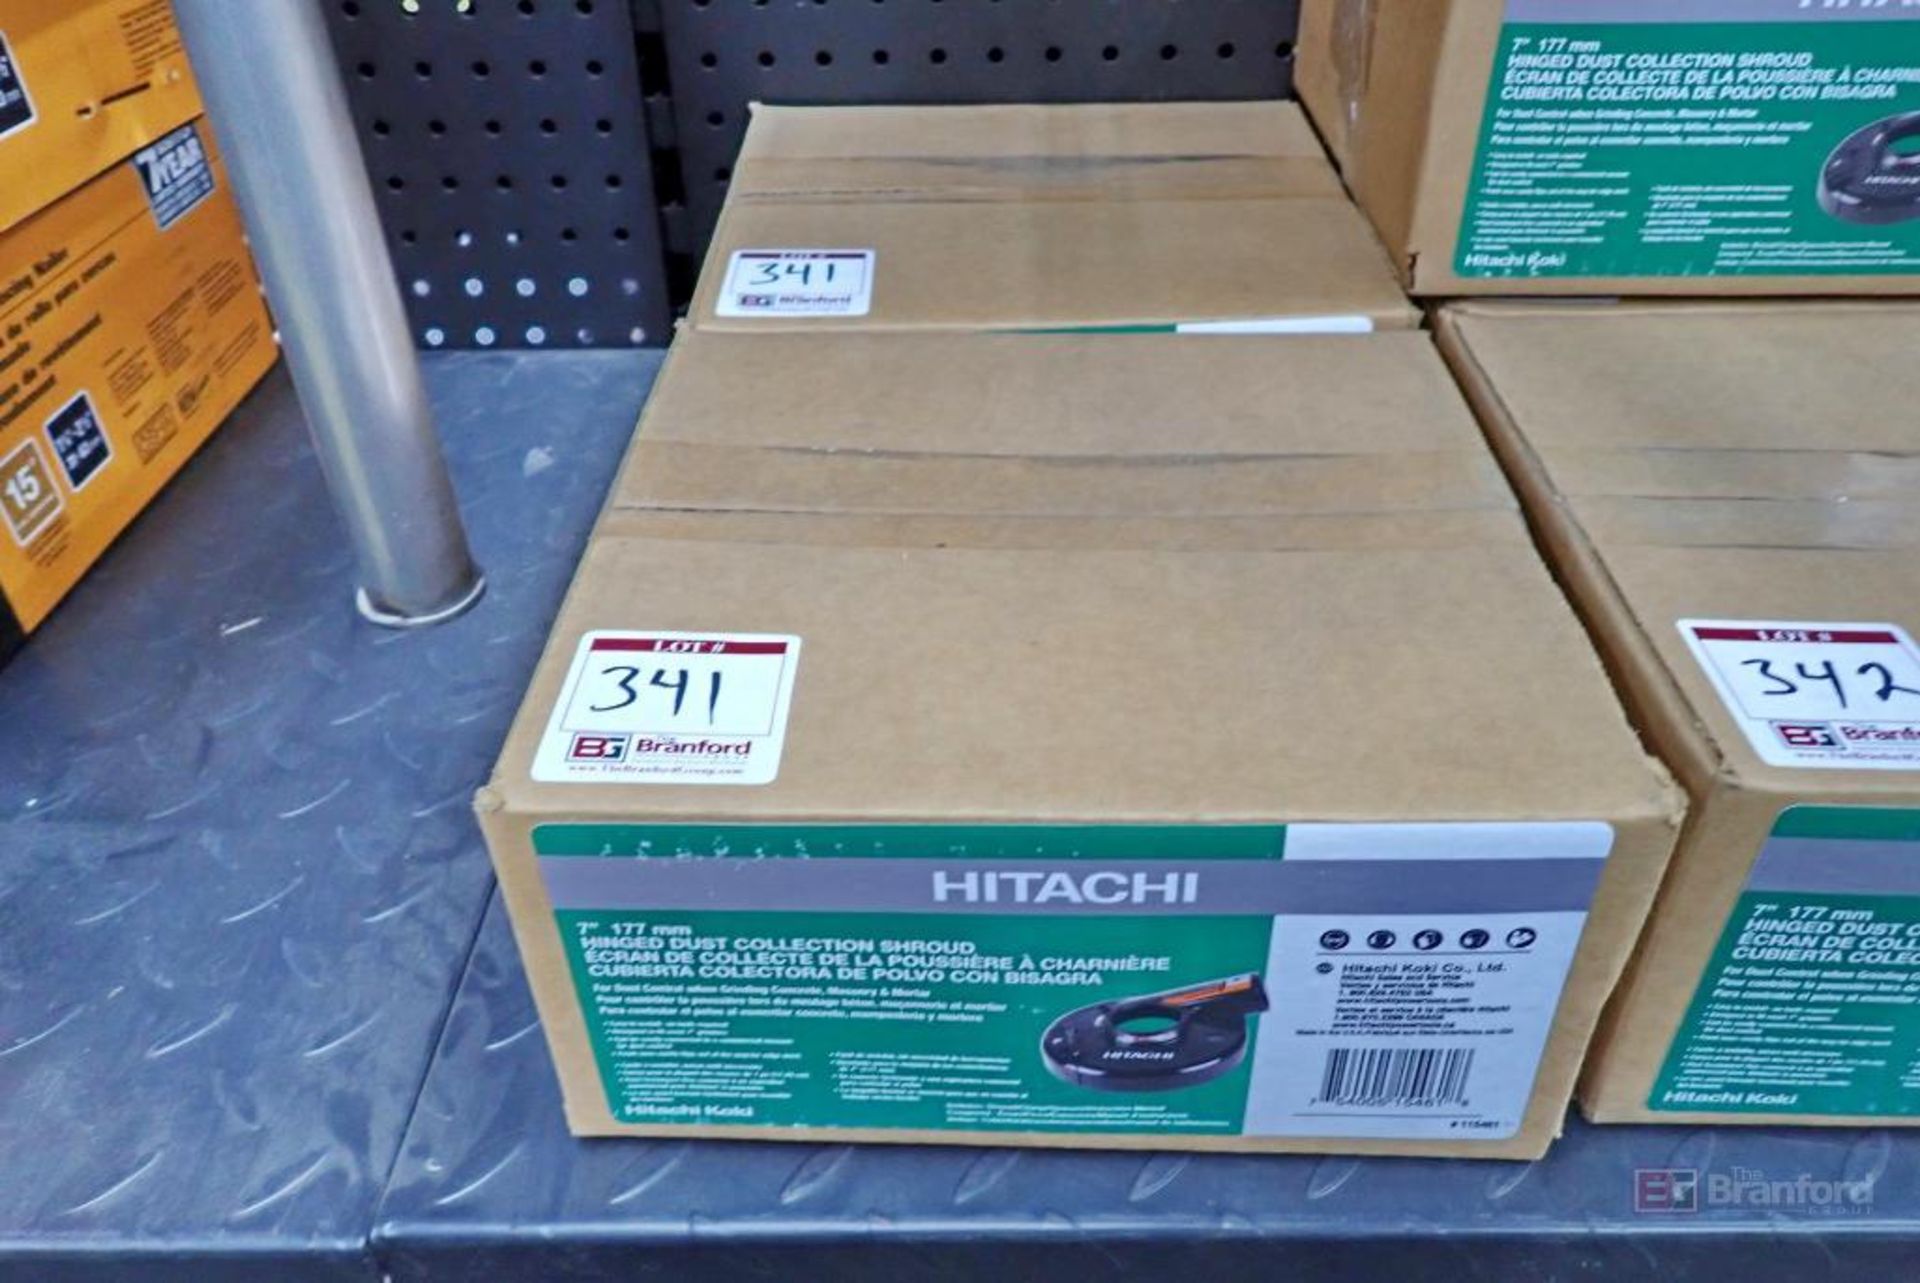 (2) Hitachi 115461 7" 177mm Hinged Dust Collection Shrouds